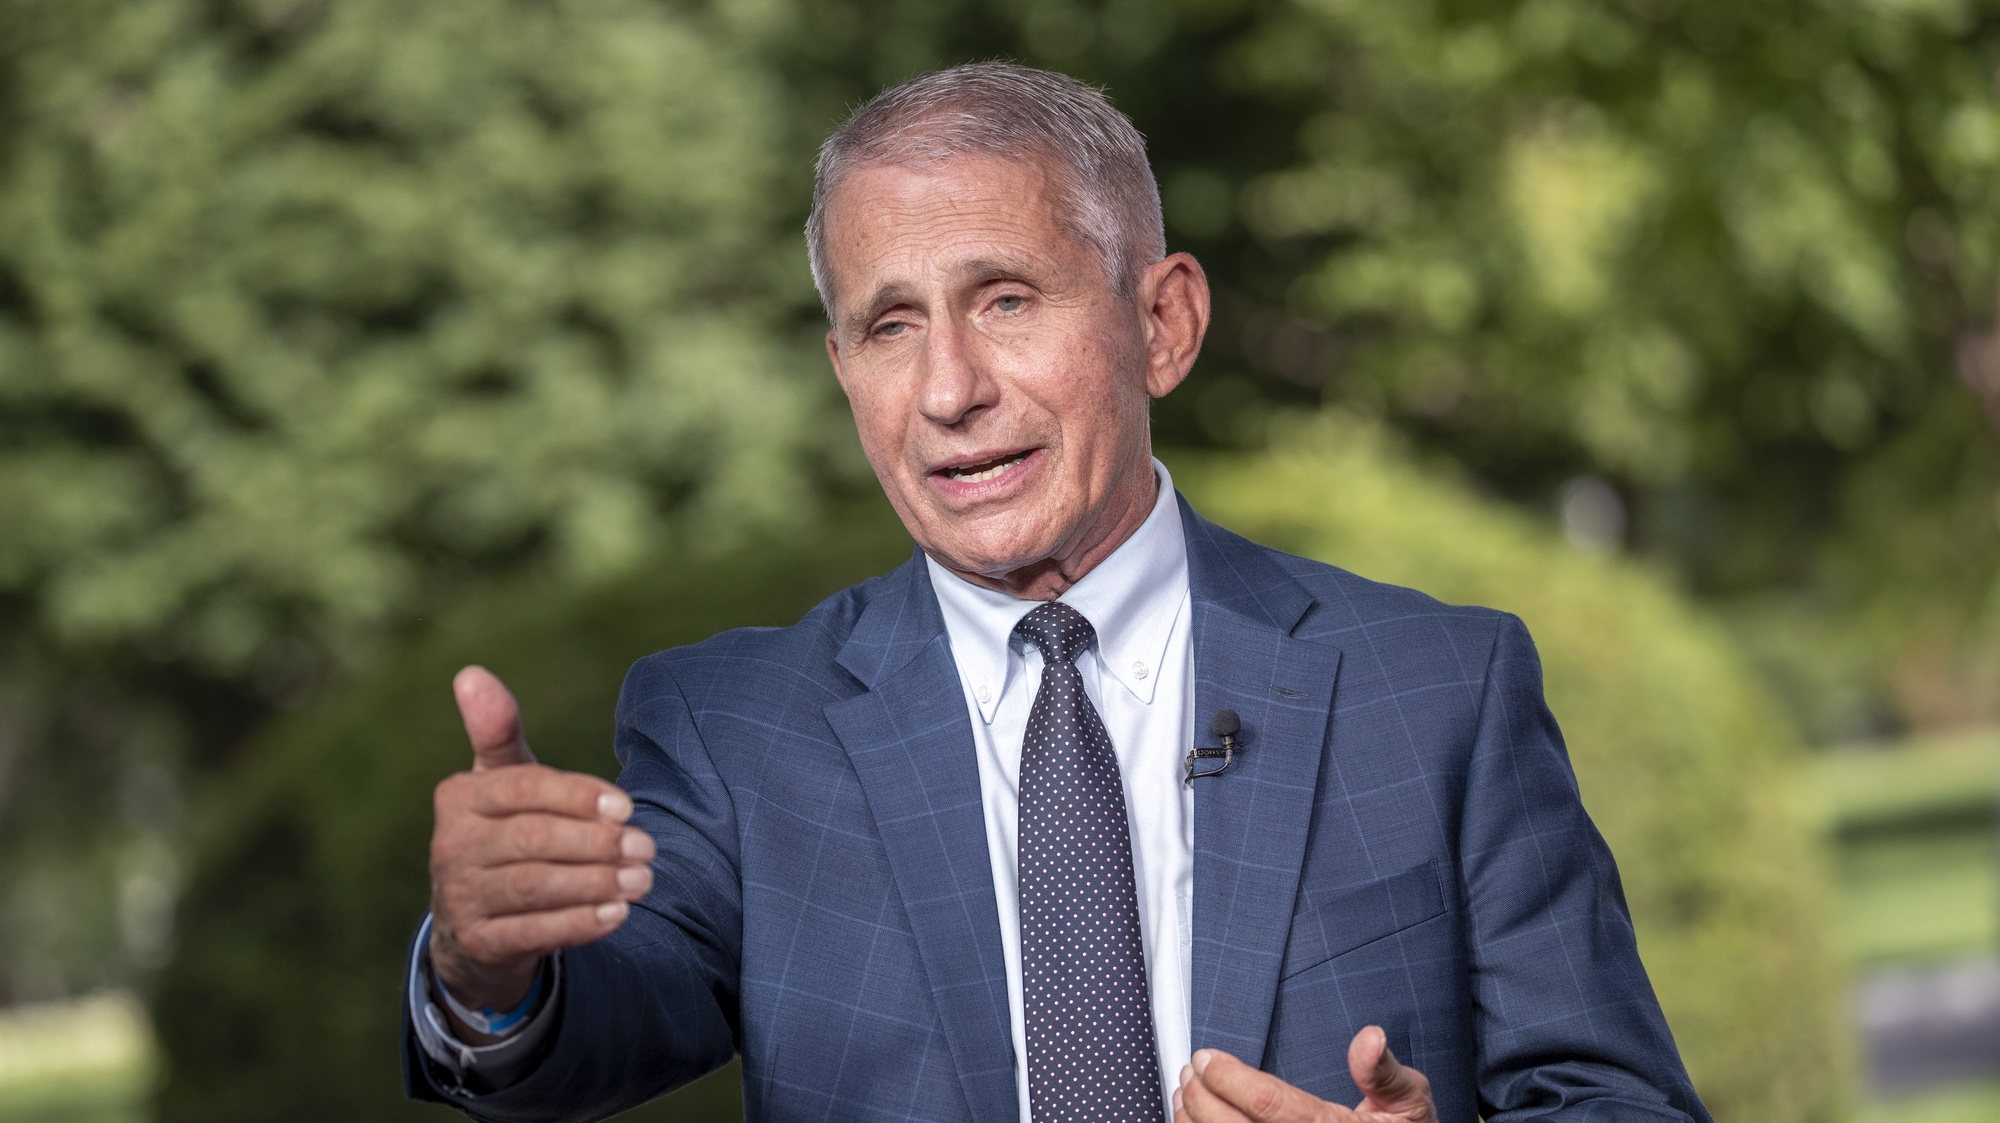 epa09419588 Anthony Fauci, director of the US National Institute of Allergy and Infectious Diseases (NIAID) participates in a television interview at the White House in Washington, DC, USA, 18 August 2021. President Biden said top federal health officials recommend that all Americans get a booster shot eight months after becoming fully vaccinated against COVID-19.  EPA/SHAWN THEW